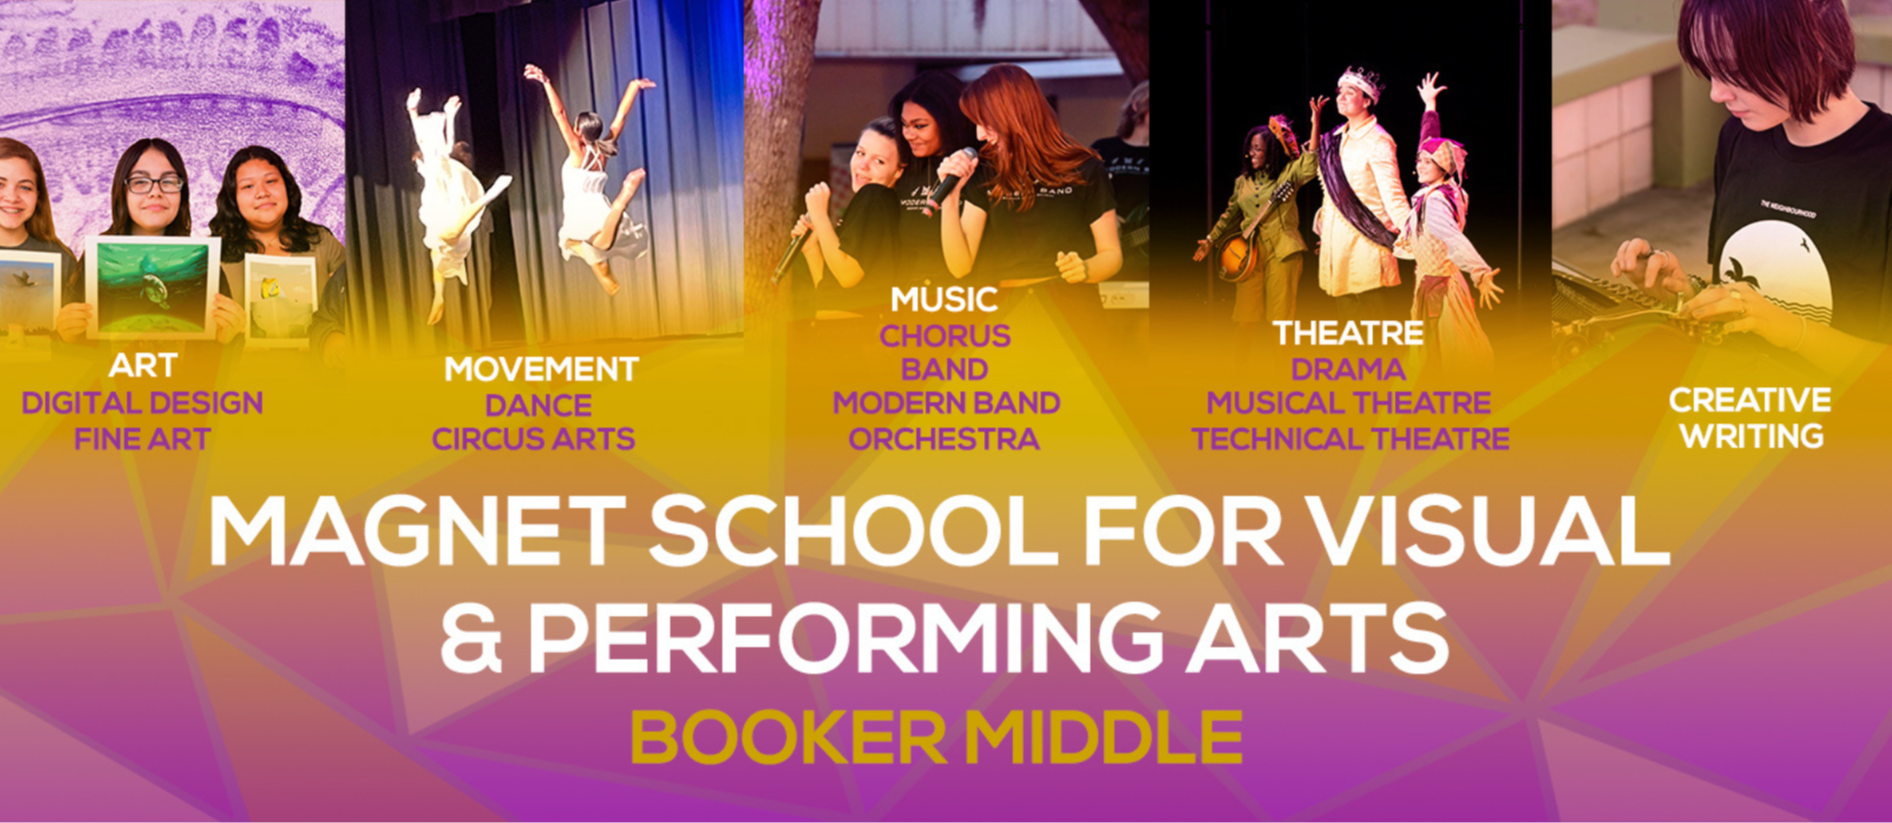 banner of performing arts programs Booker Middle offers, art, digital design fine art, movement dance circus arts, music chorus band modern band orchestra, theatre drama musical theatre technical theatre, creative writing